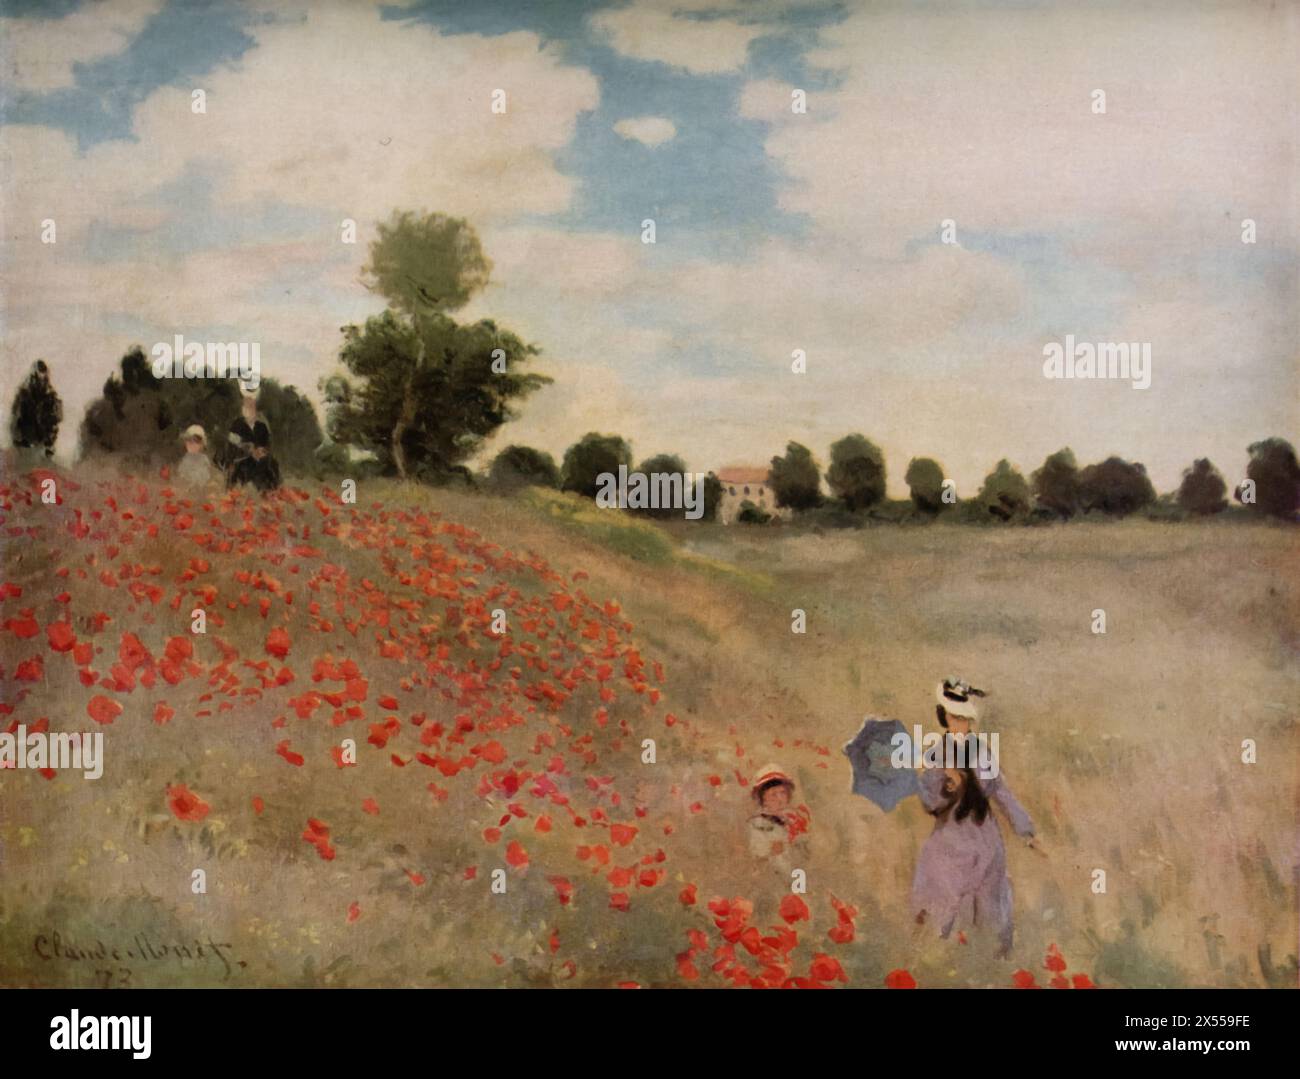 Field of Poppies' by Claude Monet, painted in 1873, Housed at the Musée d'Orsay in Paris, France. This painting is a example of Monet's early Impressionist work, depicting a bright, colorful field of poppies with figures strolling through it. This work is celebrated for its dynamic, open composition and the way Monet conveys the luminosity and movement of the natural landscape. Stock Photo